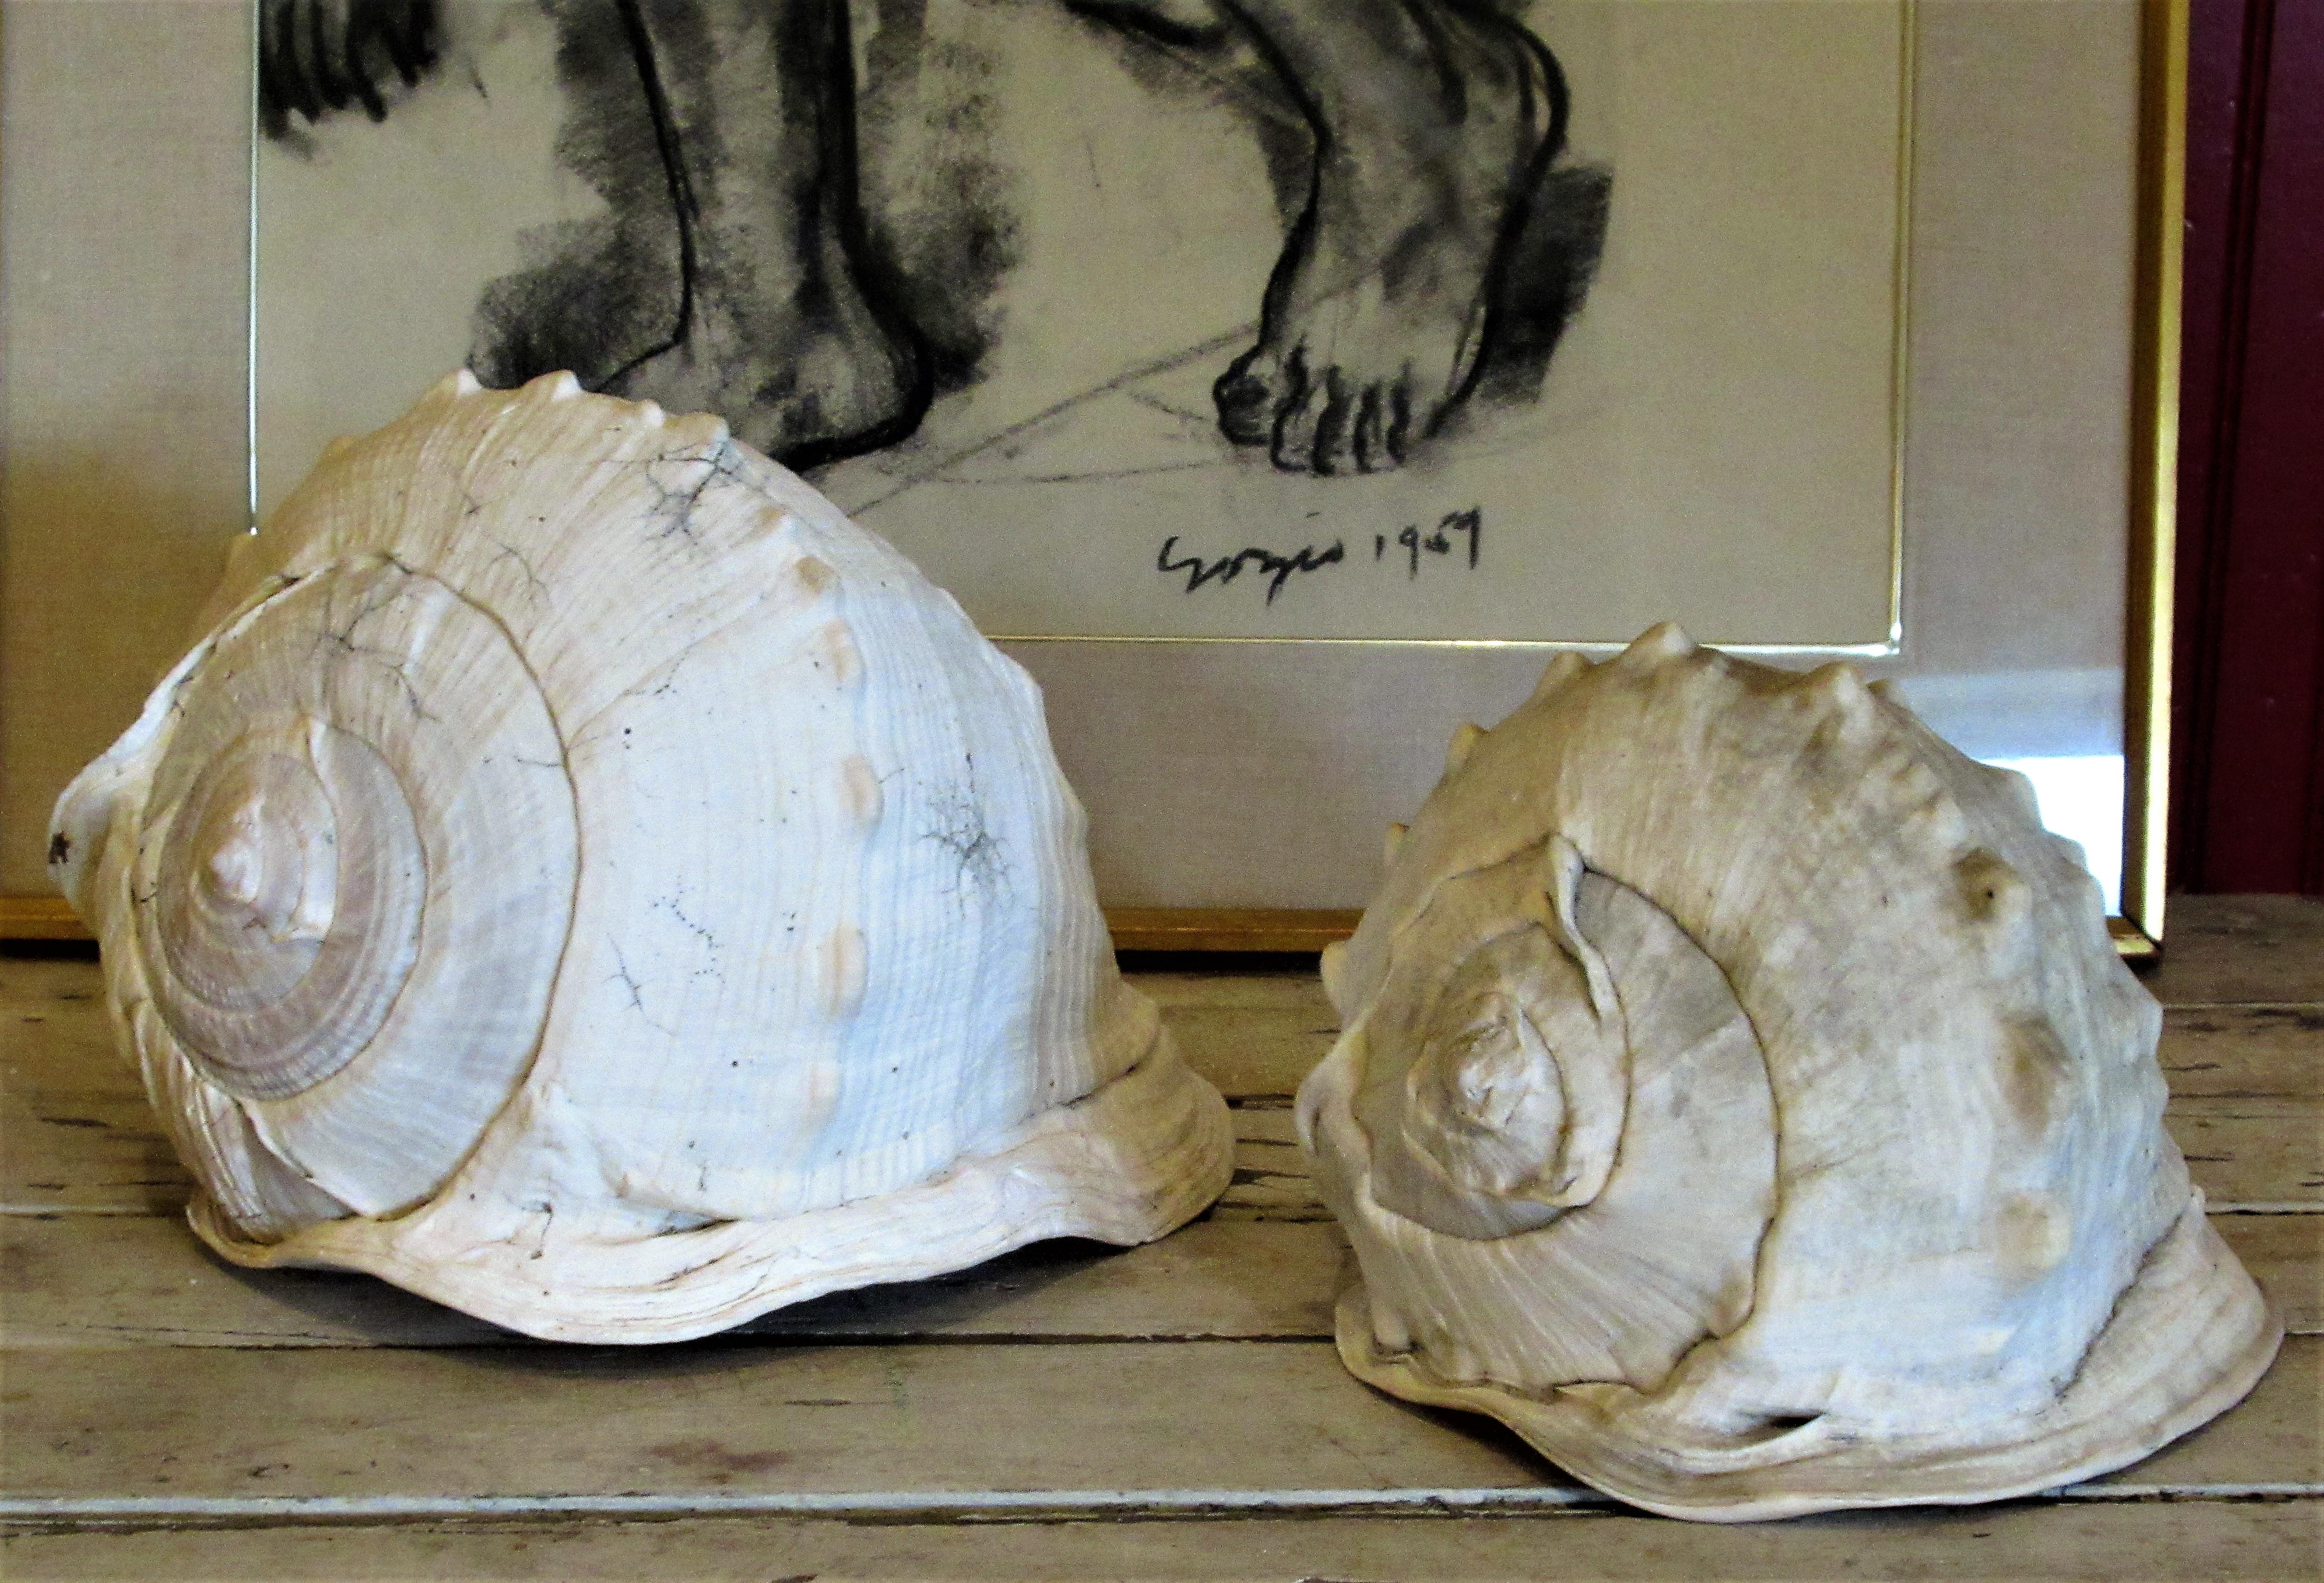 Two big queen emperor helmet conch shell natural specimens. These are from an old western NY estate and were collected many years ago. Large shell measures 12 inches wide by 8 inches deep x 8.5 inches high. Small shell measures 9.50 inches wide by